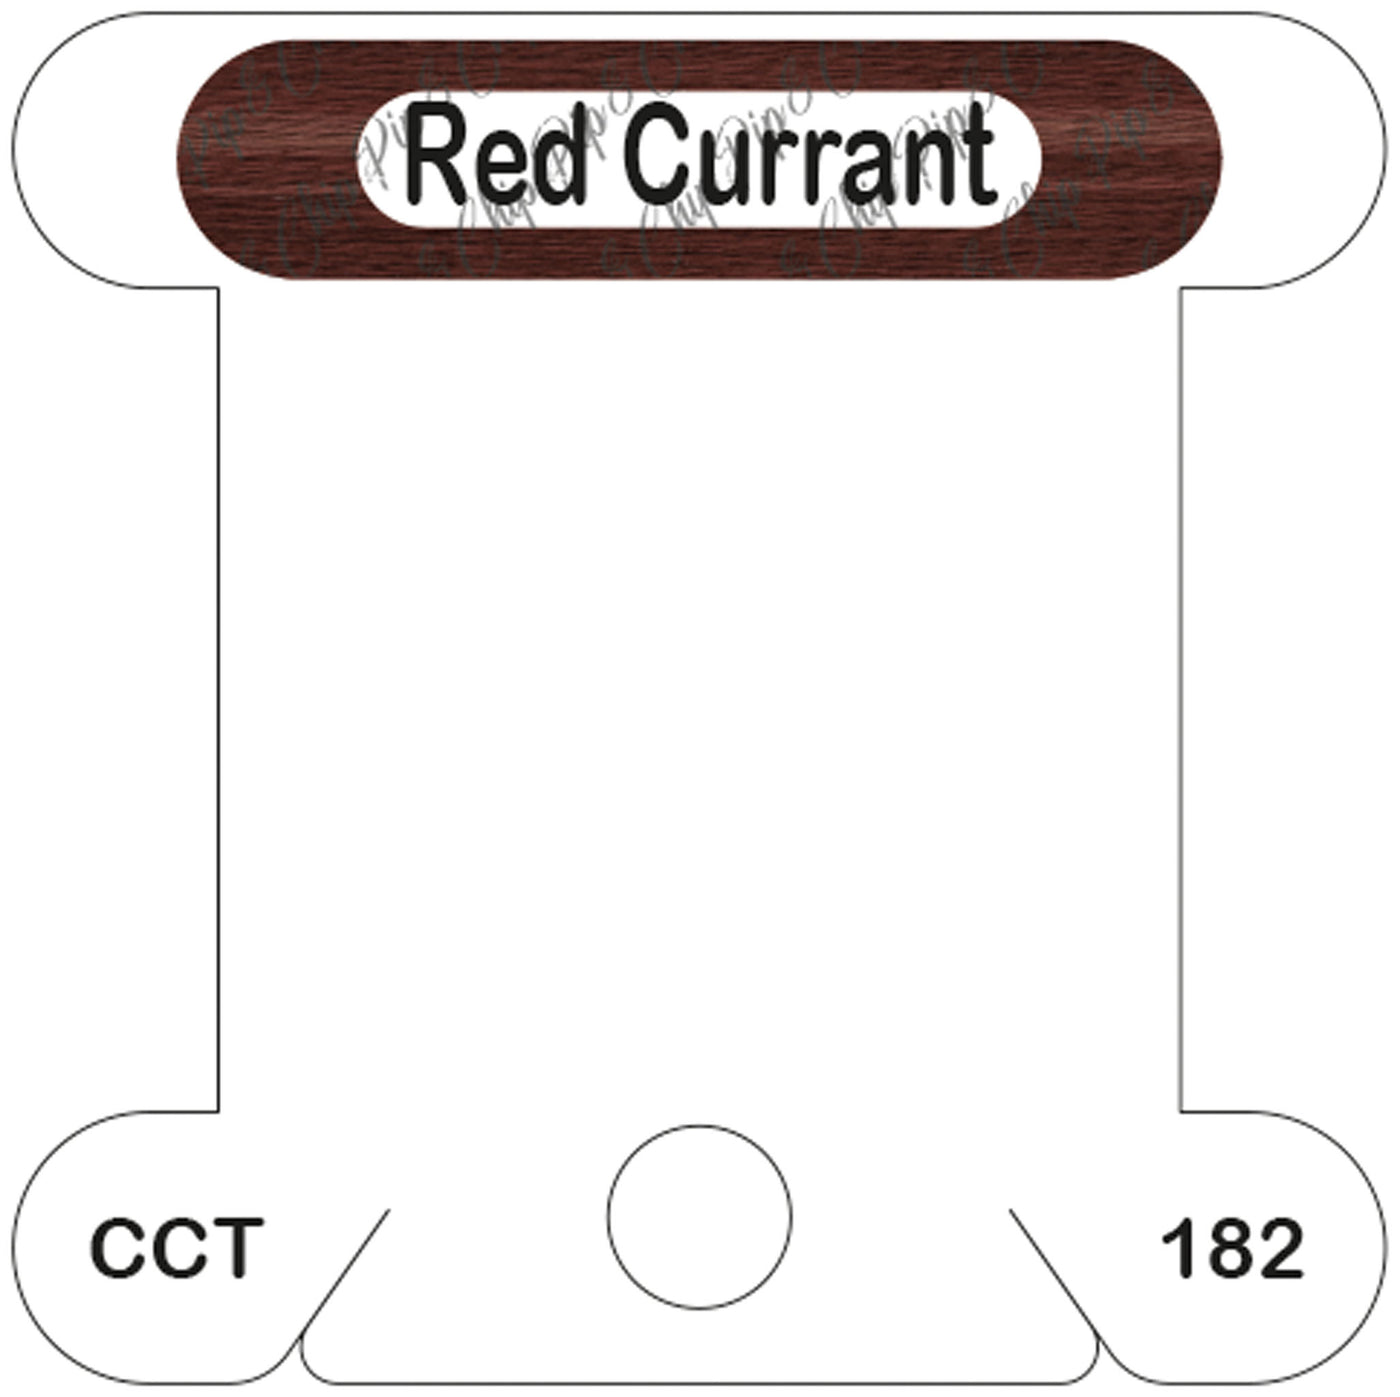 Classic Colorworks Red Currant acrylic bobbin